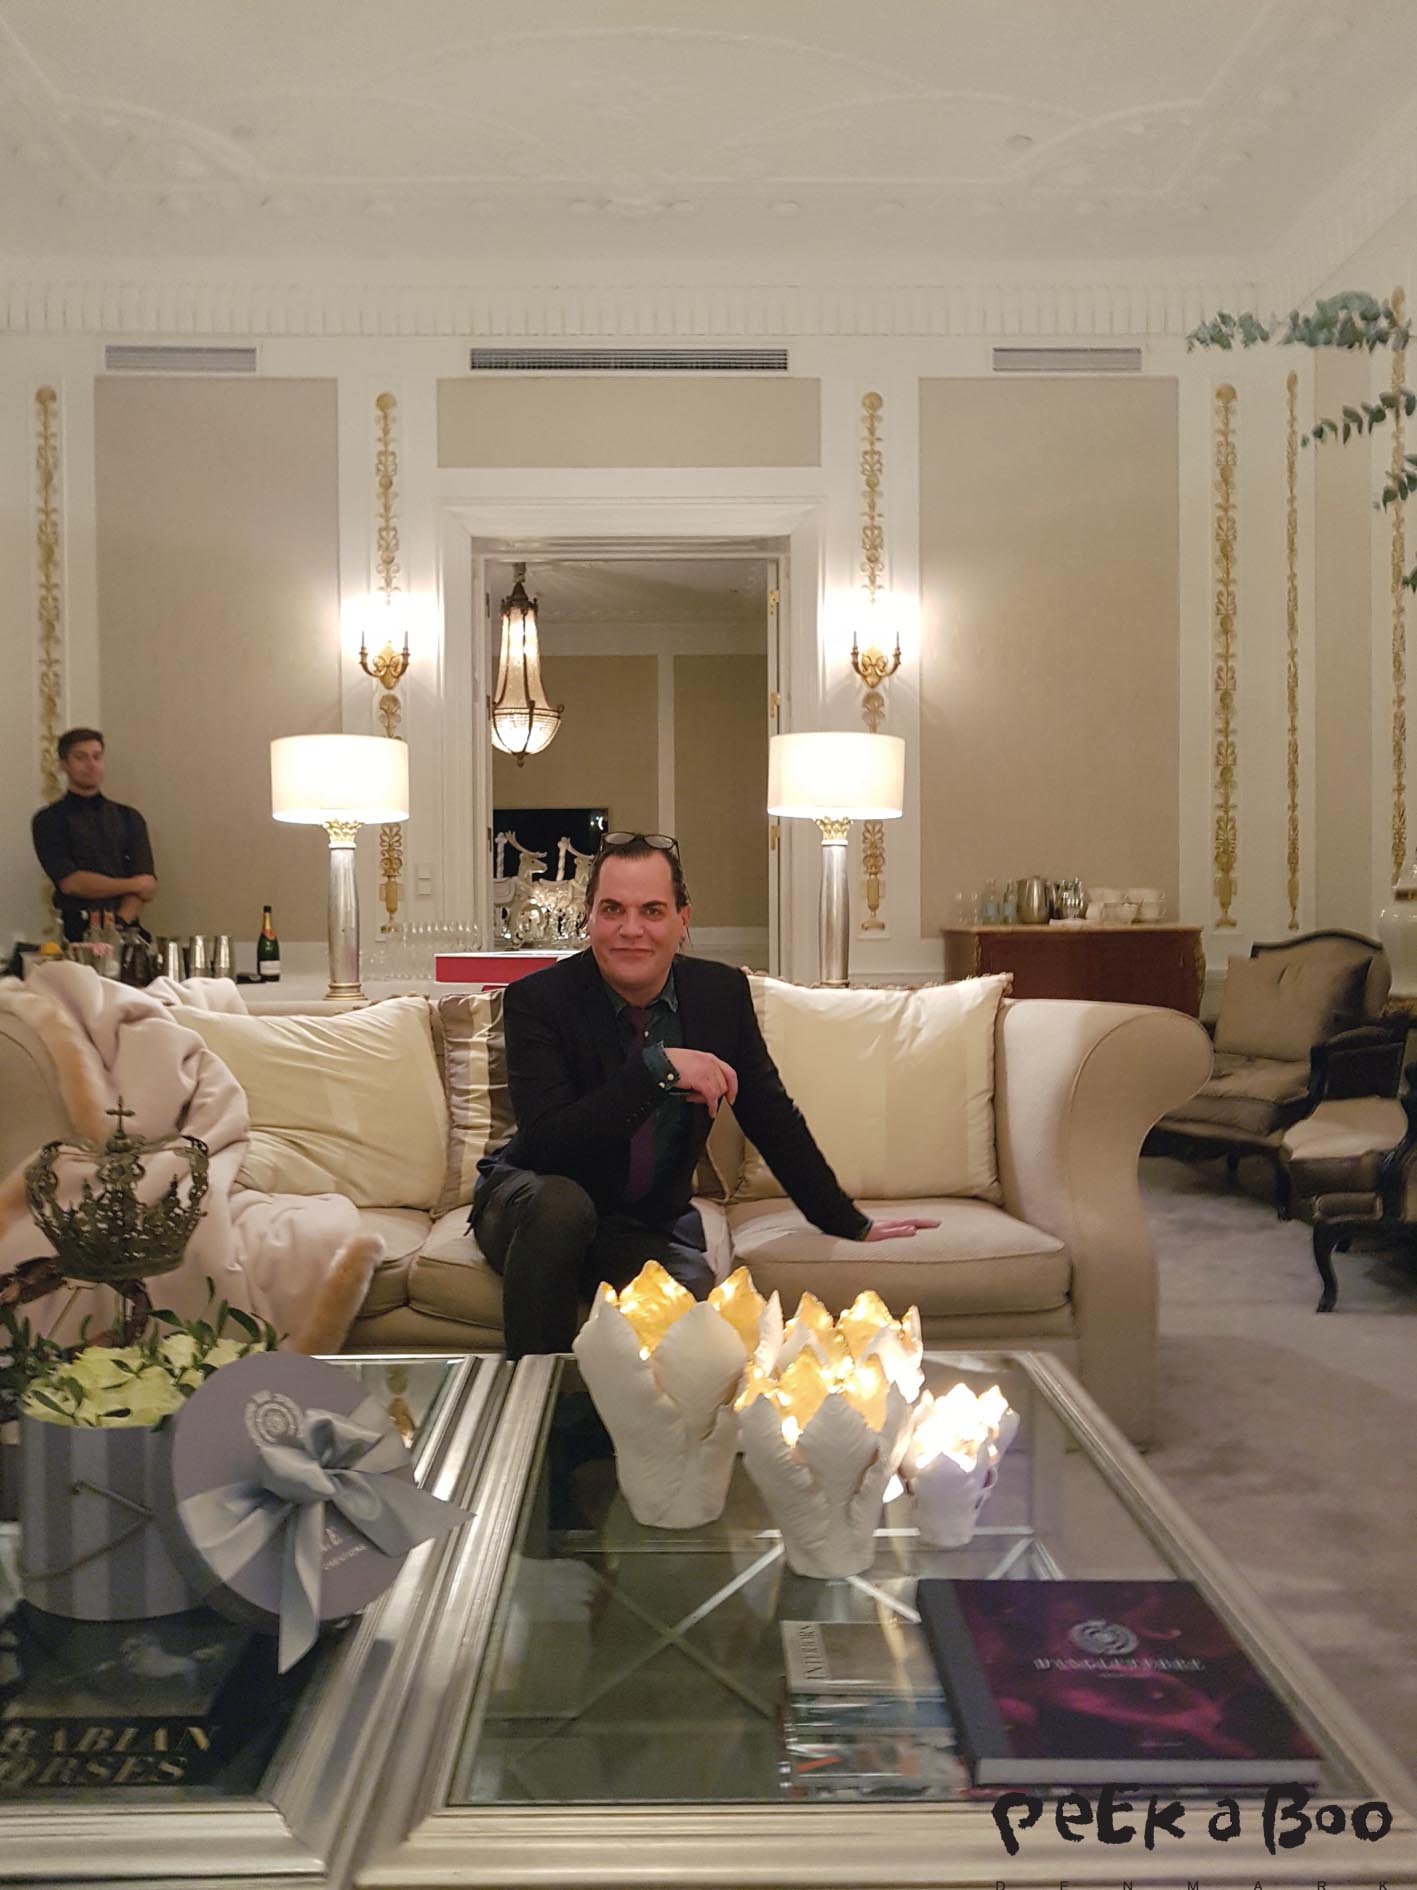 The talented Creative Director Alan Evensen in the Royal Suite of Hotel d'Angleterre.